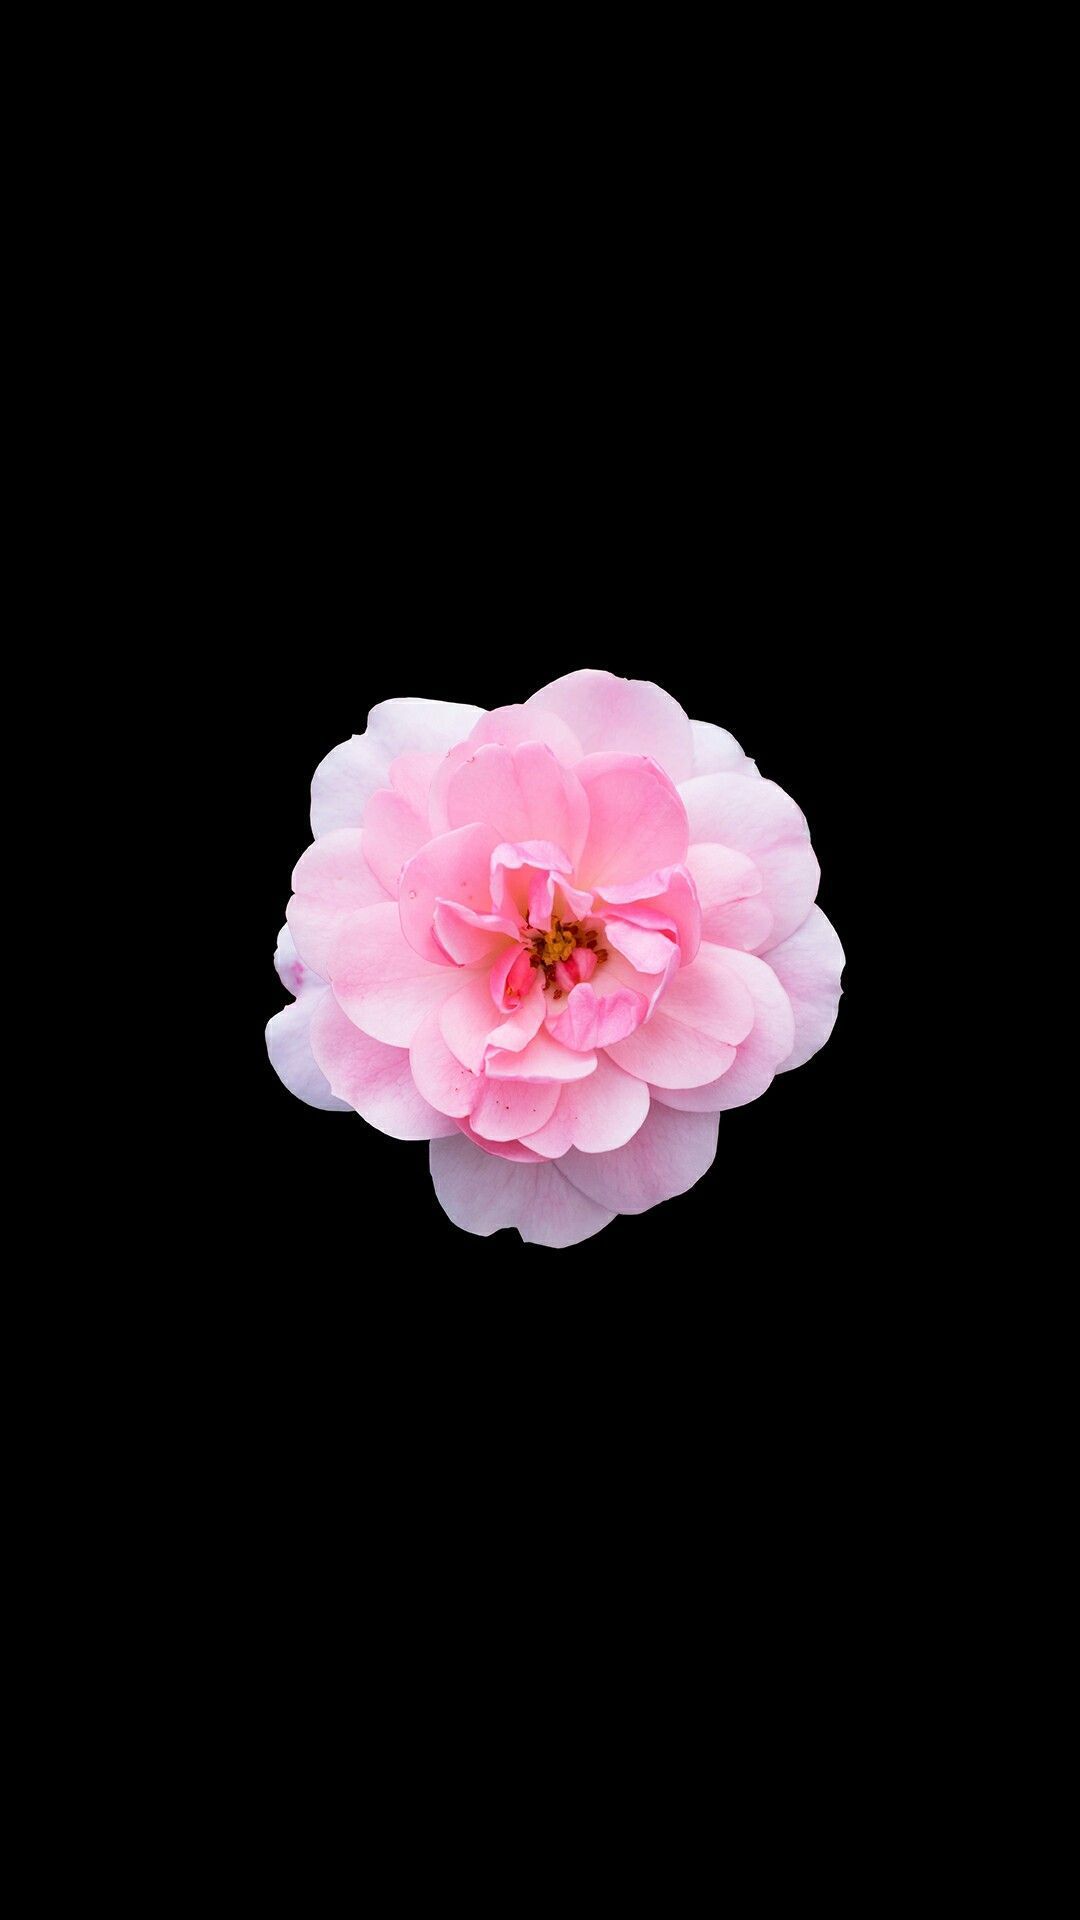 Best 9 Flower Wallpaper 1080p For Your Android or iPhone Wallpaper #android #iphone #wall. Pink wallpaper iphone, Flower iphone wallpaper, Pink flowers wallpaper